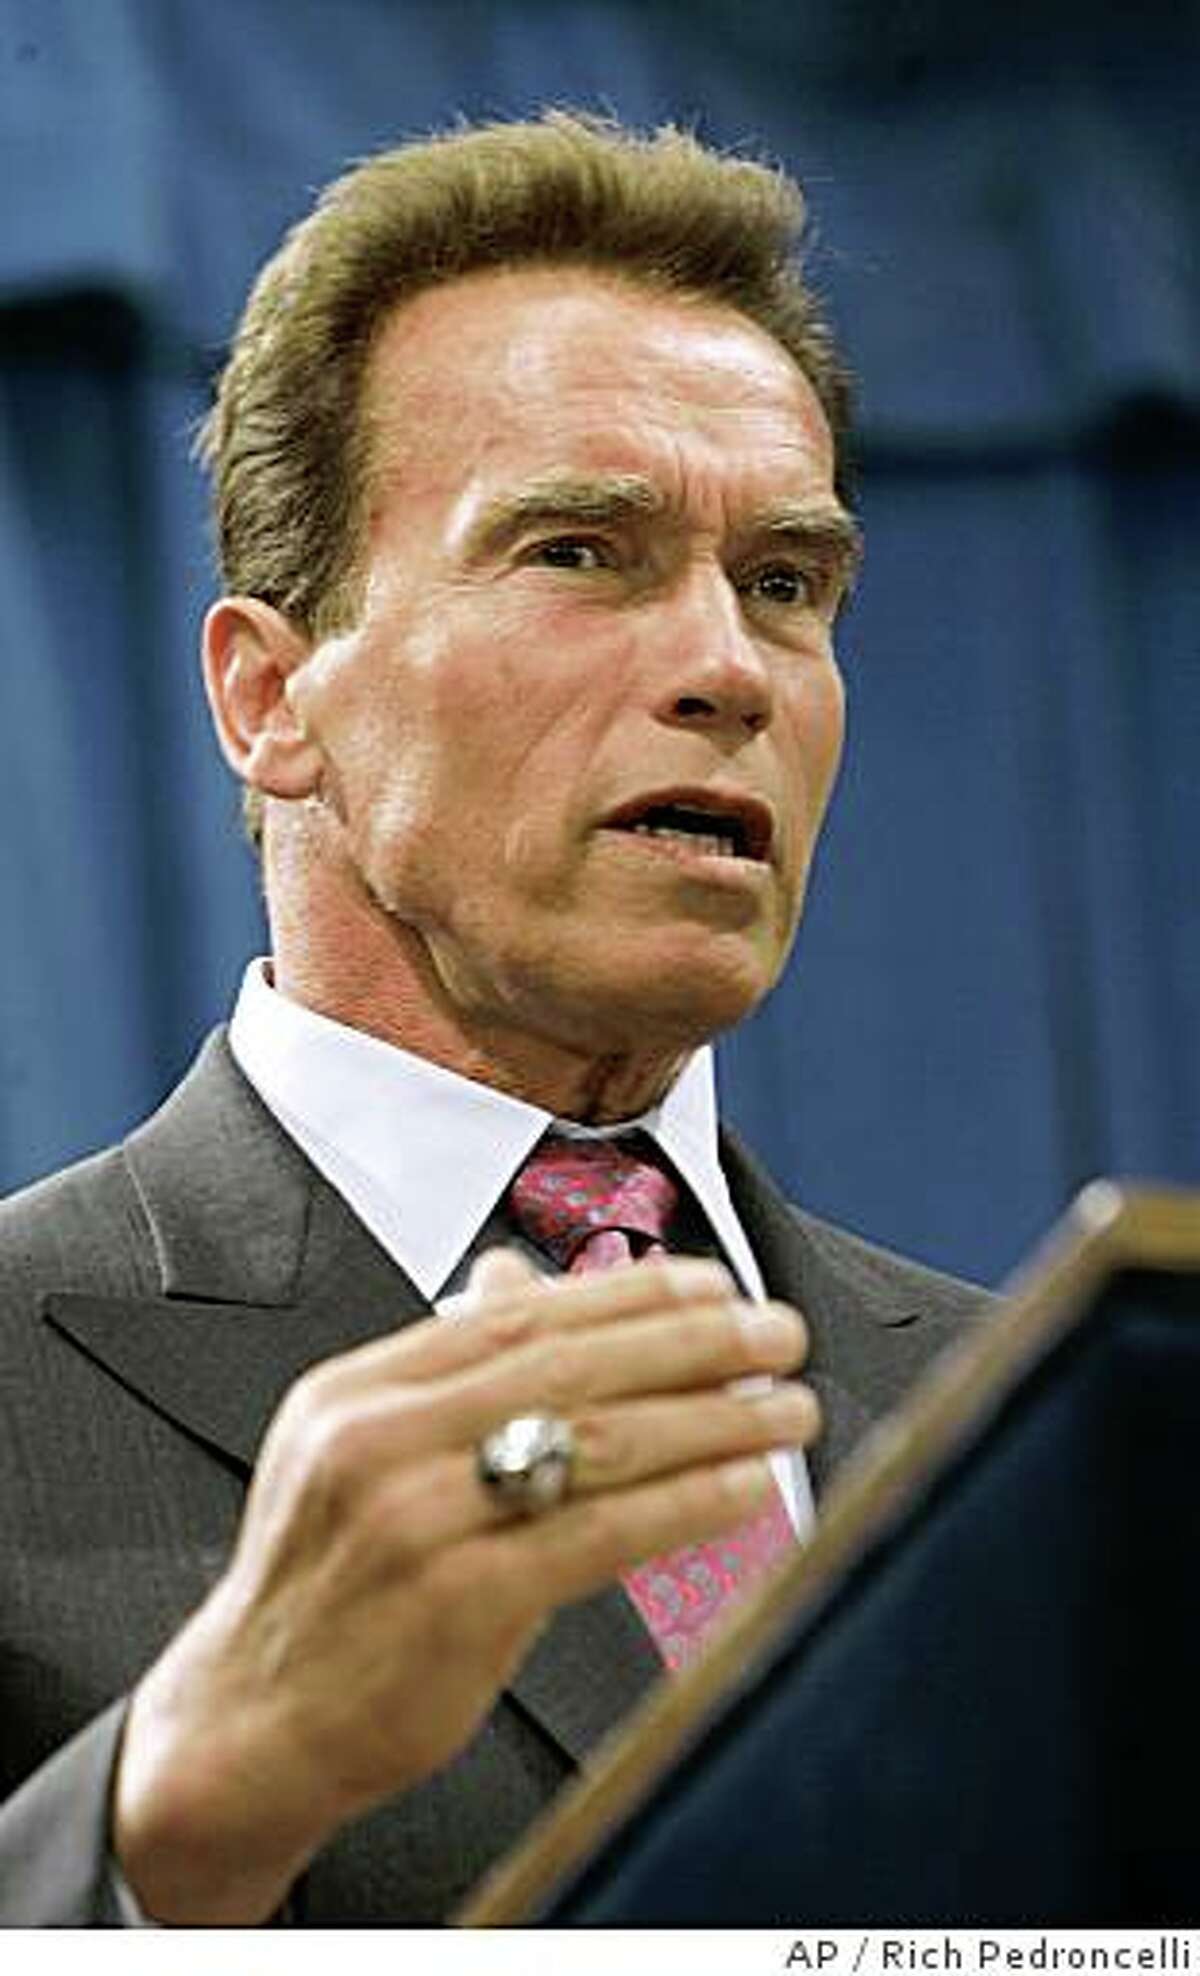 Gov. Arnold Schwarzenegger answers questions after declaring a statewide drought and signing an executive order directing the Department of Water Resources to help speed water transfers to areas with the worst shortages, during a news conference at the Capitol in Sacramento, Calif., Wednesday, June 4, 2008. Schwarzenegger made the drought declaration because the state has had two years of below-average rainfall, and low snow melt runoff.(AP Photo/Rich Pedroncelli)